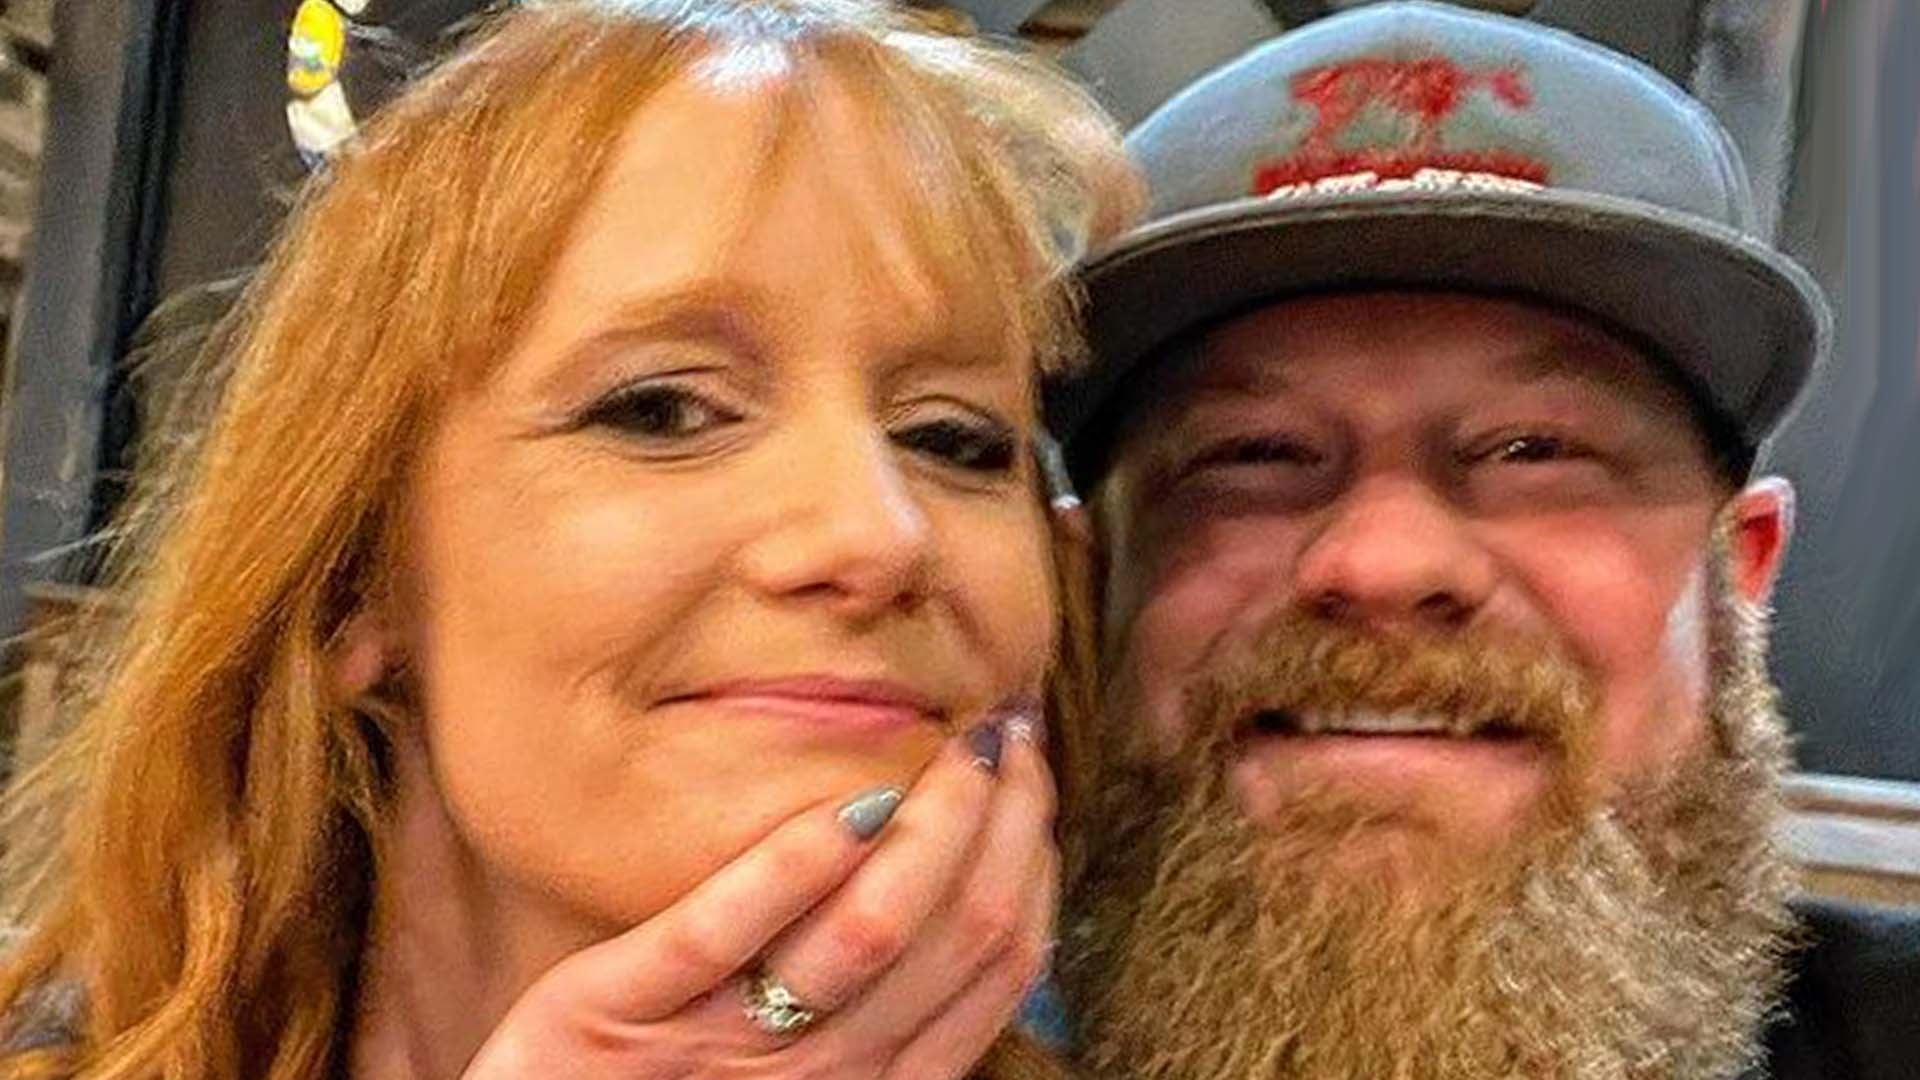 Jake Flint, Country Singer, Dead at 37 Just Hours After Marrying Wife Brenda 